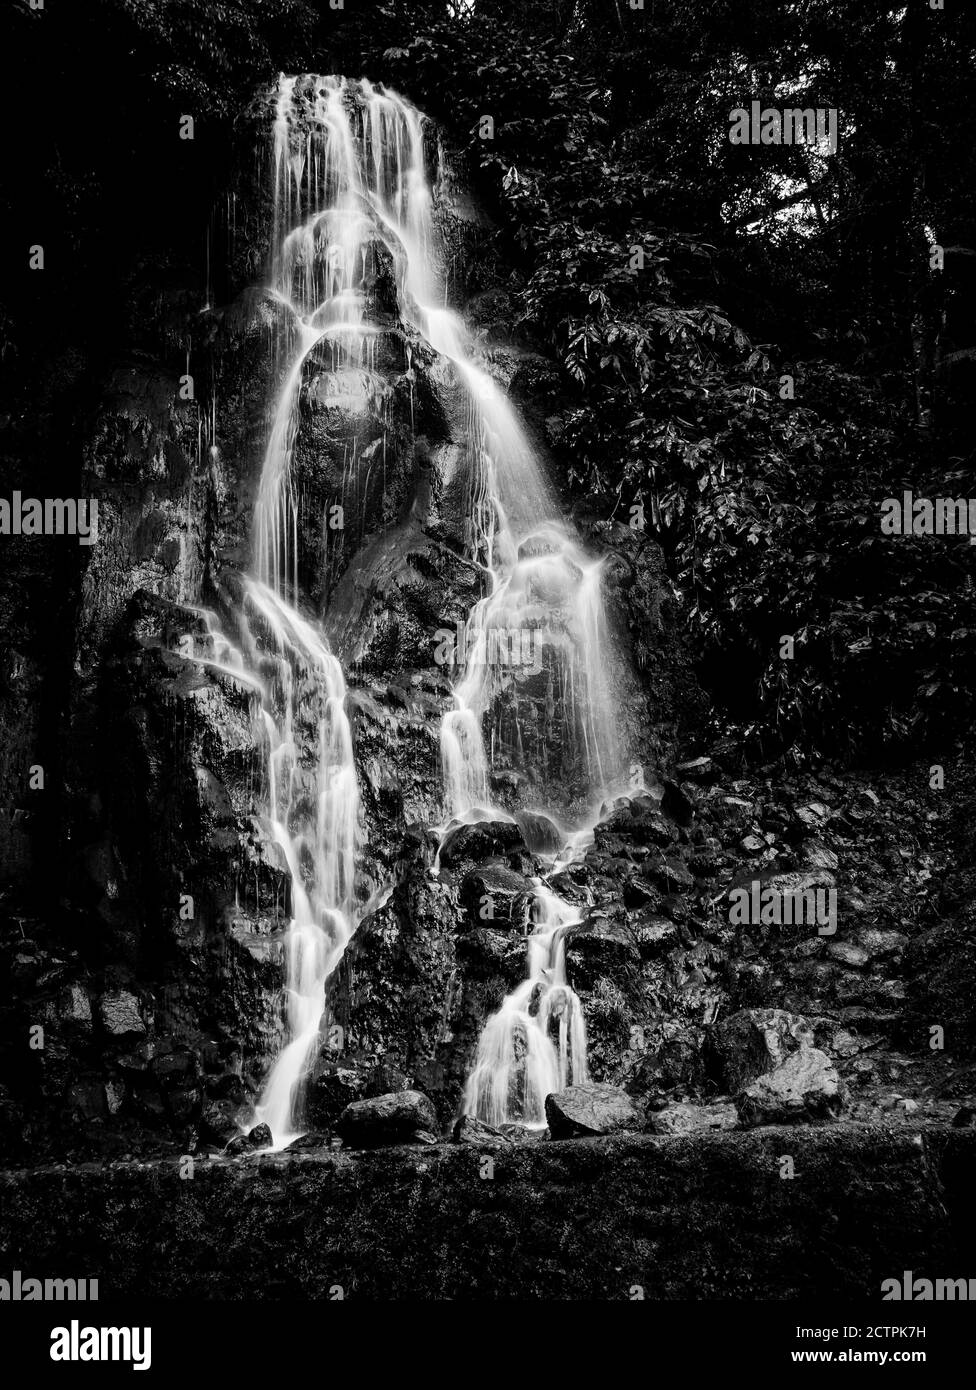 Black and White long exposure picture of Veu da Noiva waterfall, Sao Miguel island, Azores, Portugal. Stock Photo